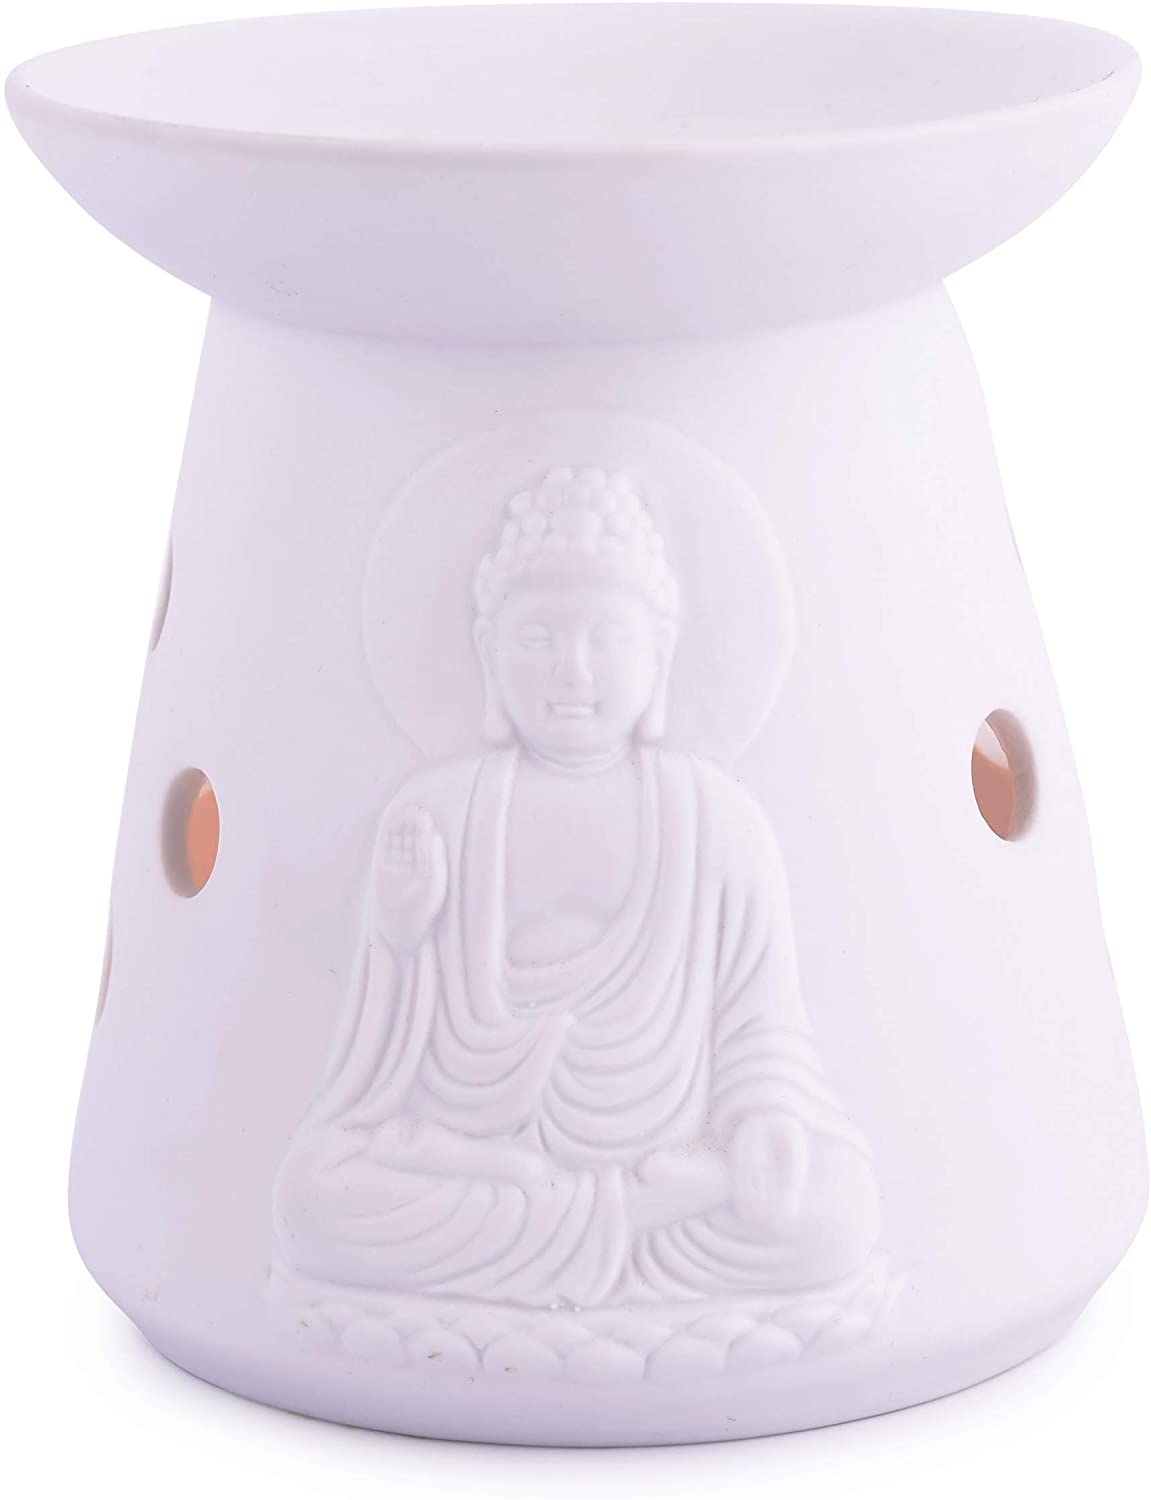 Pajoma Oil Burner Porcelain Buddha Height 12 Cm For Scented Wax And Fragran